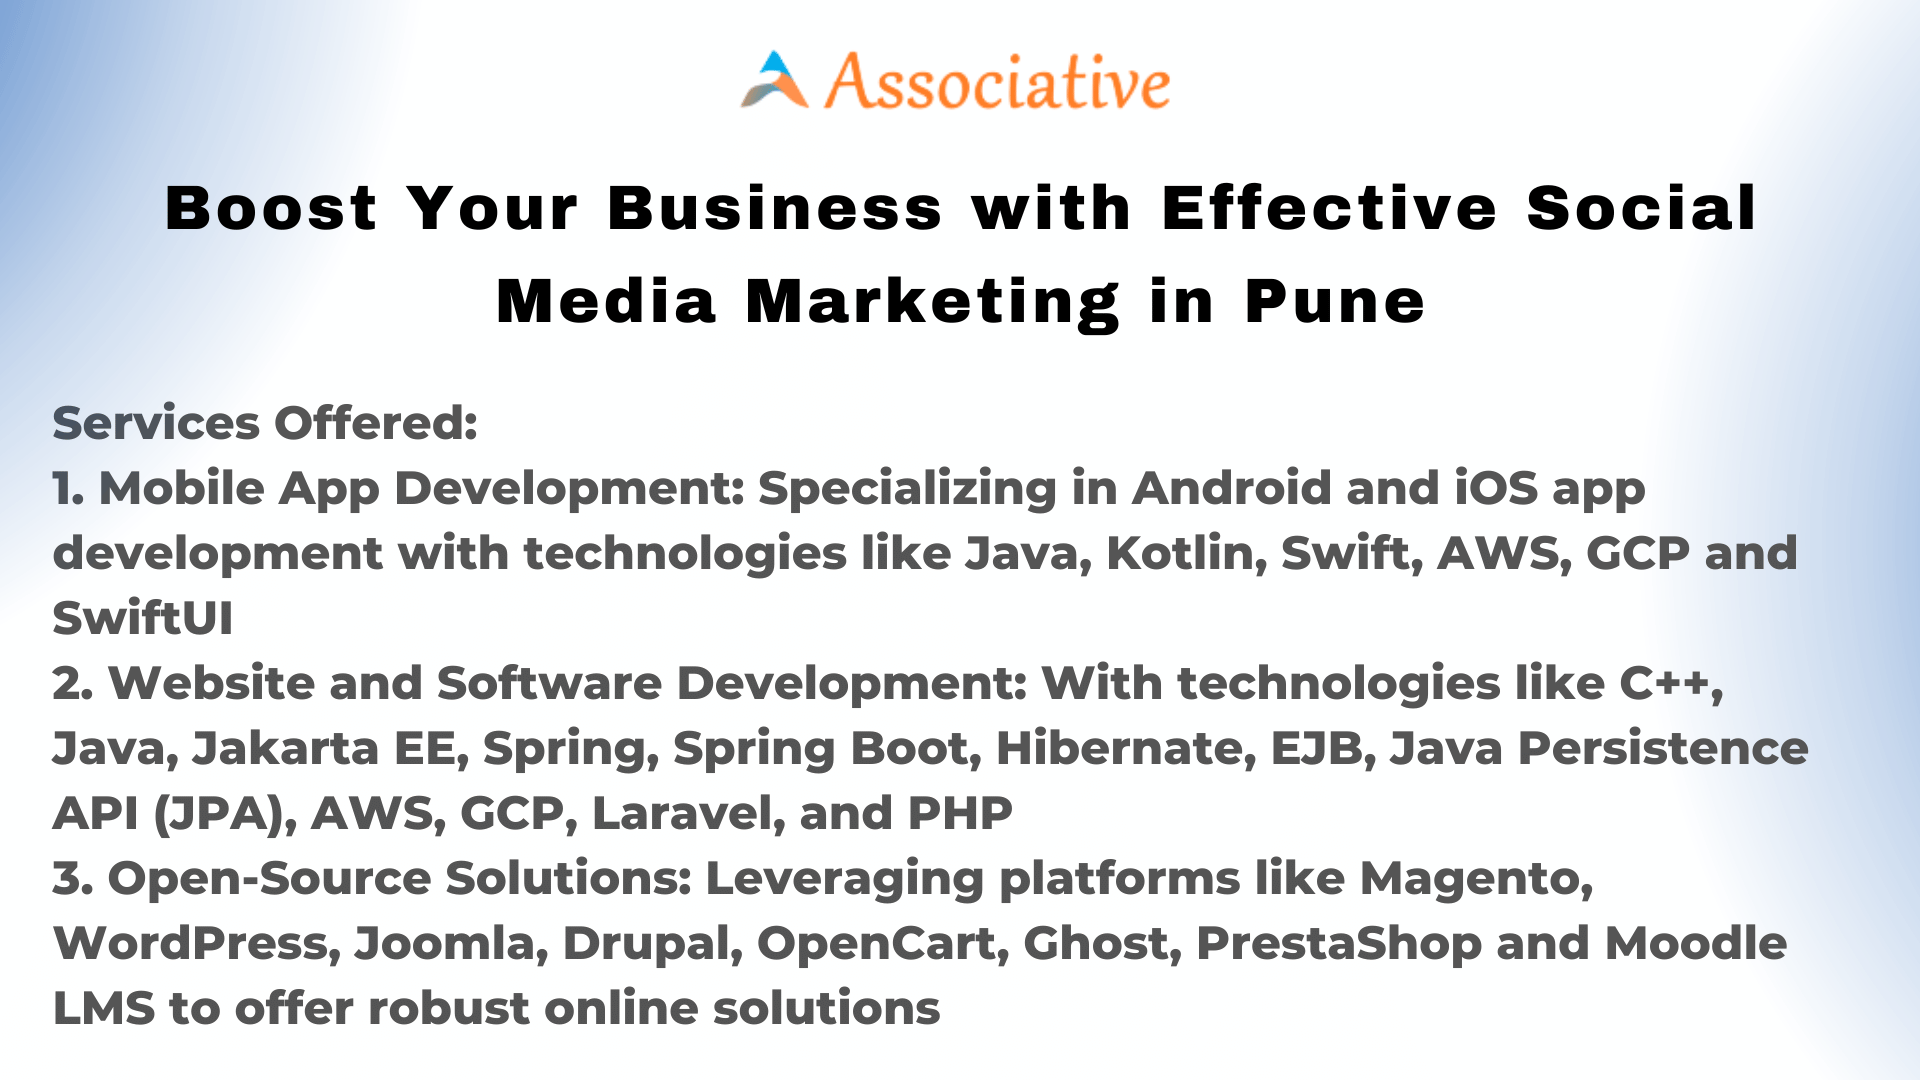 Boost Your Business with Effective Social Media Marketing in Pune